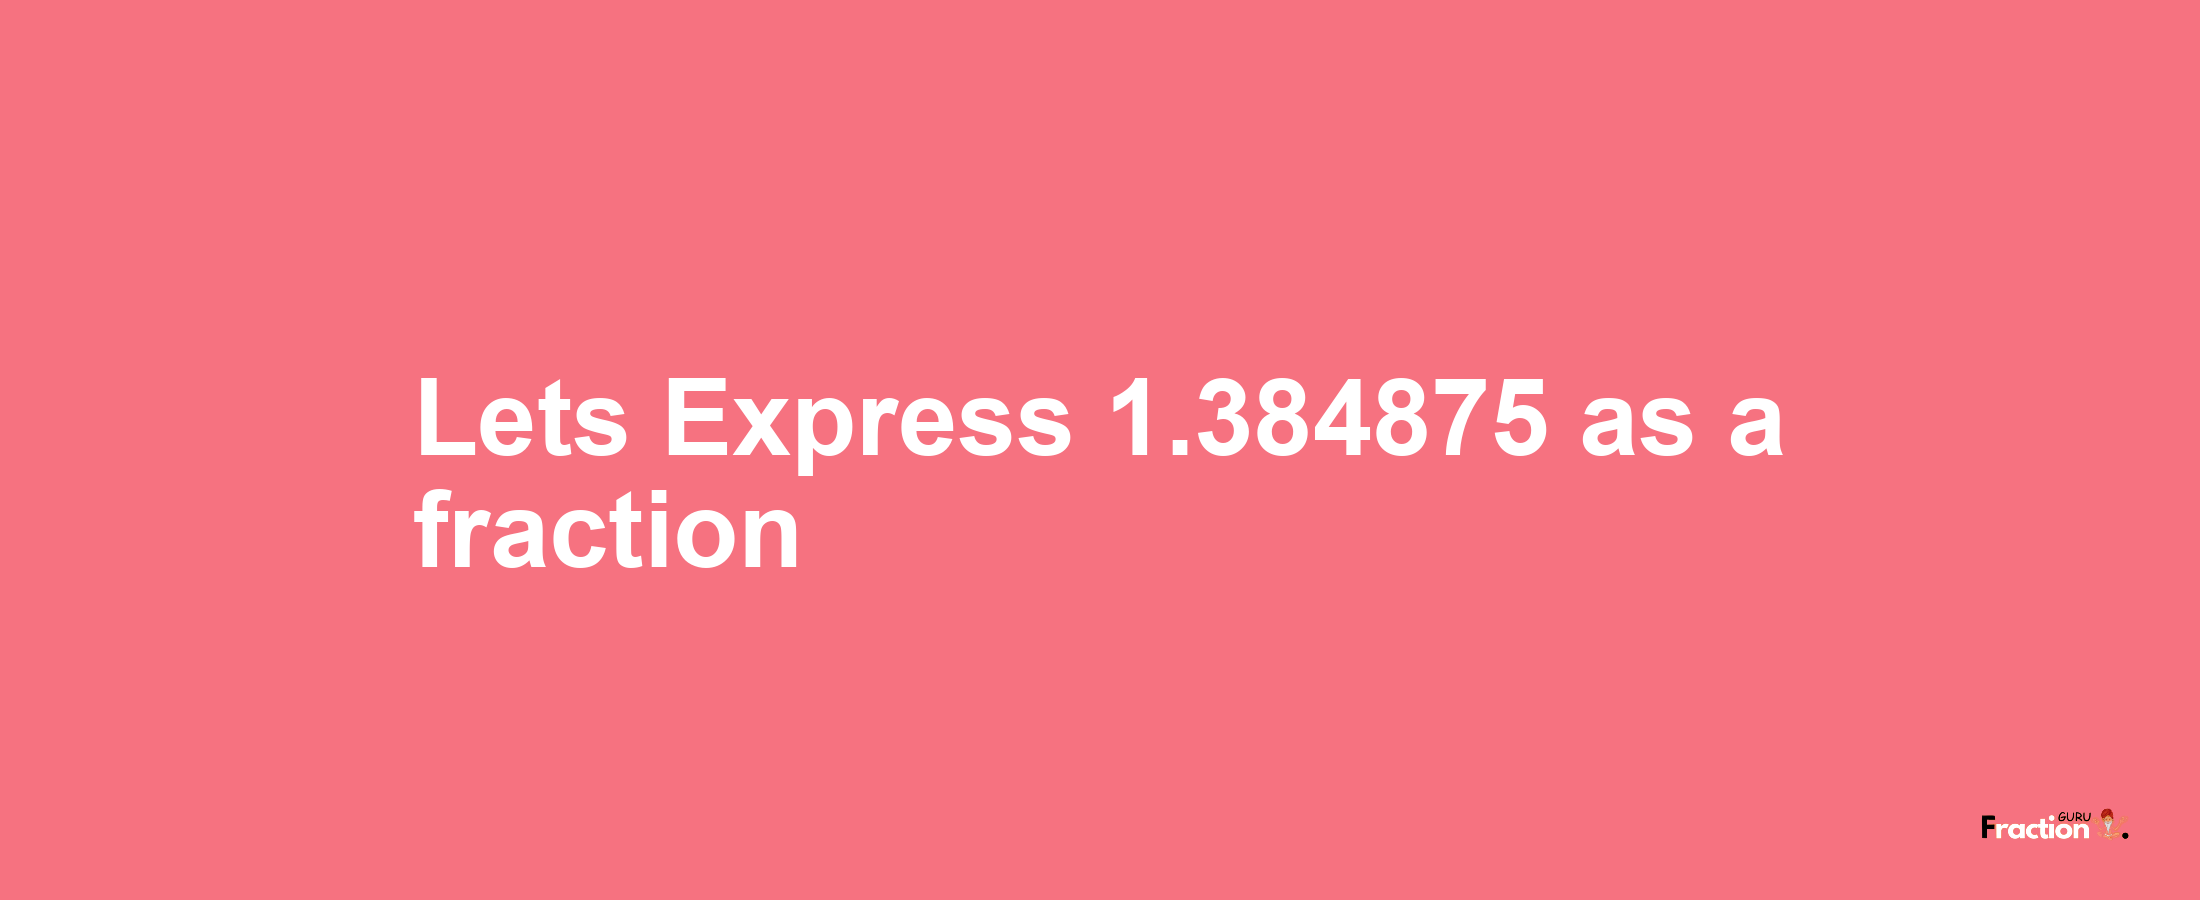 Lets Express 1.384875 as afraction